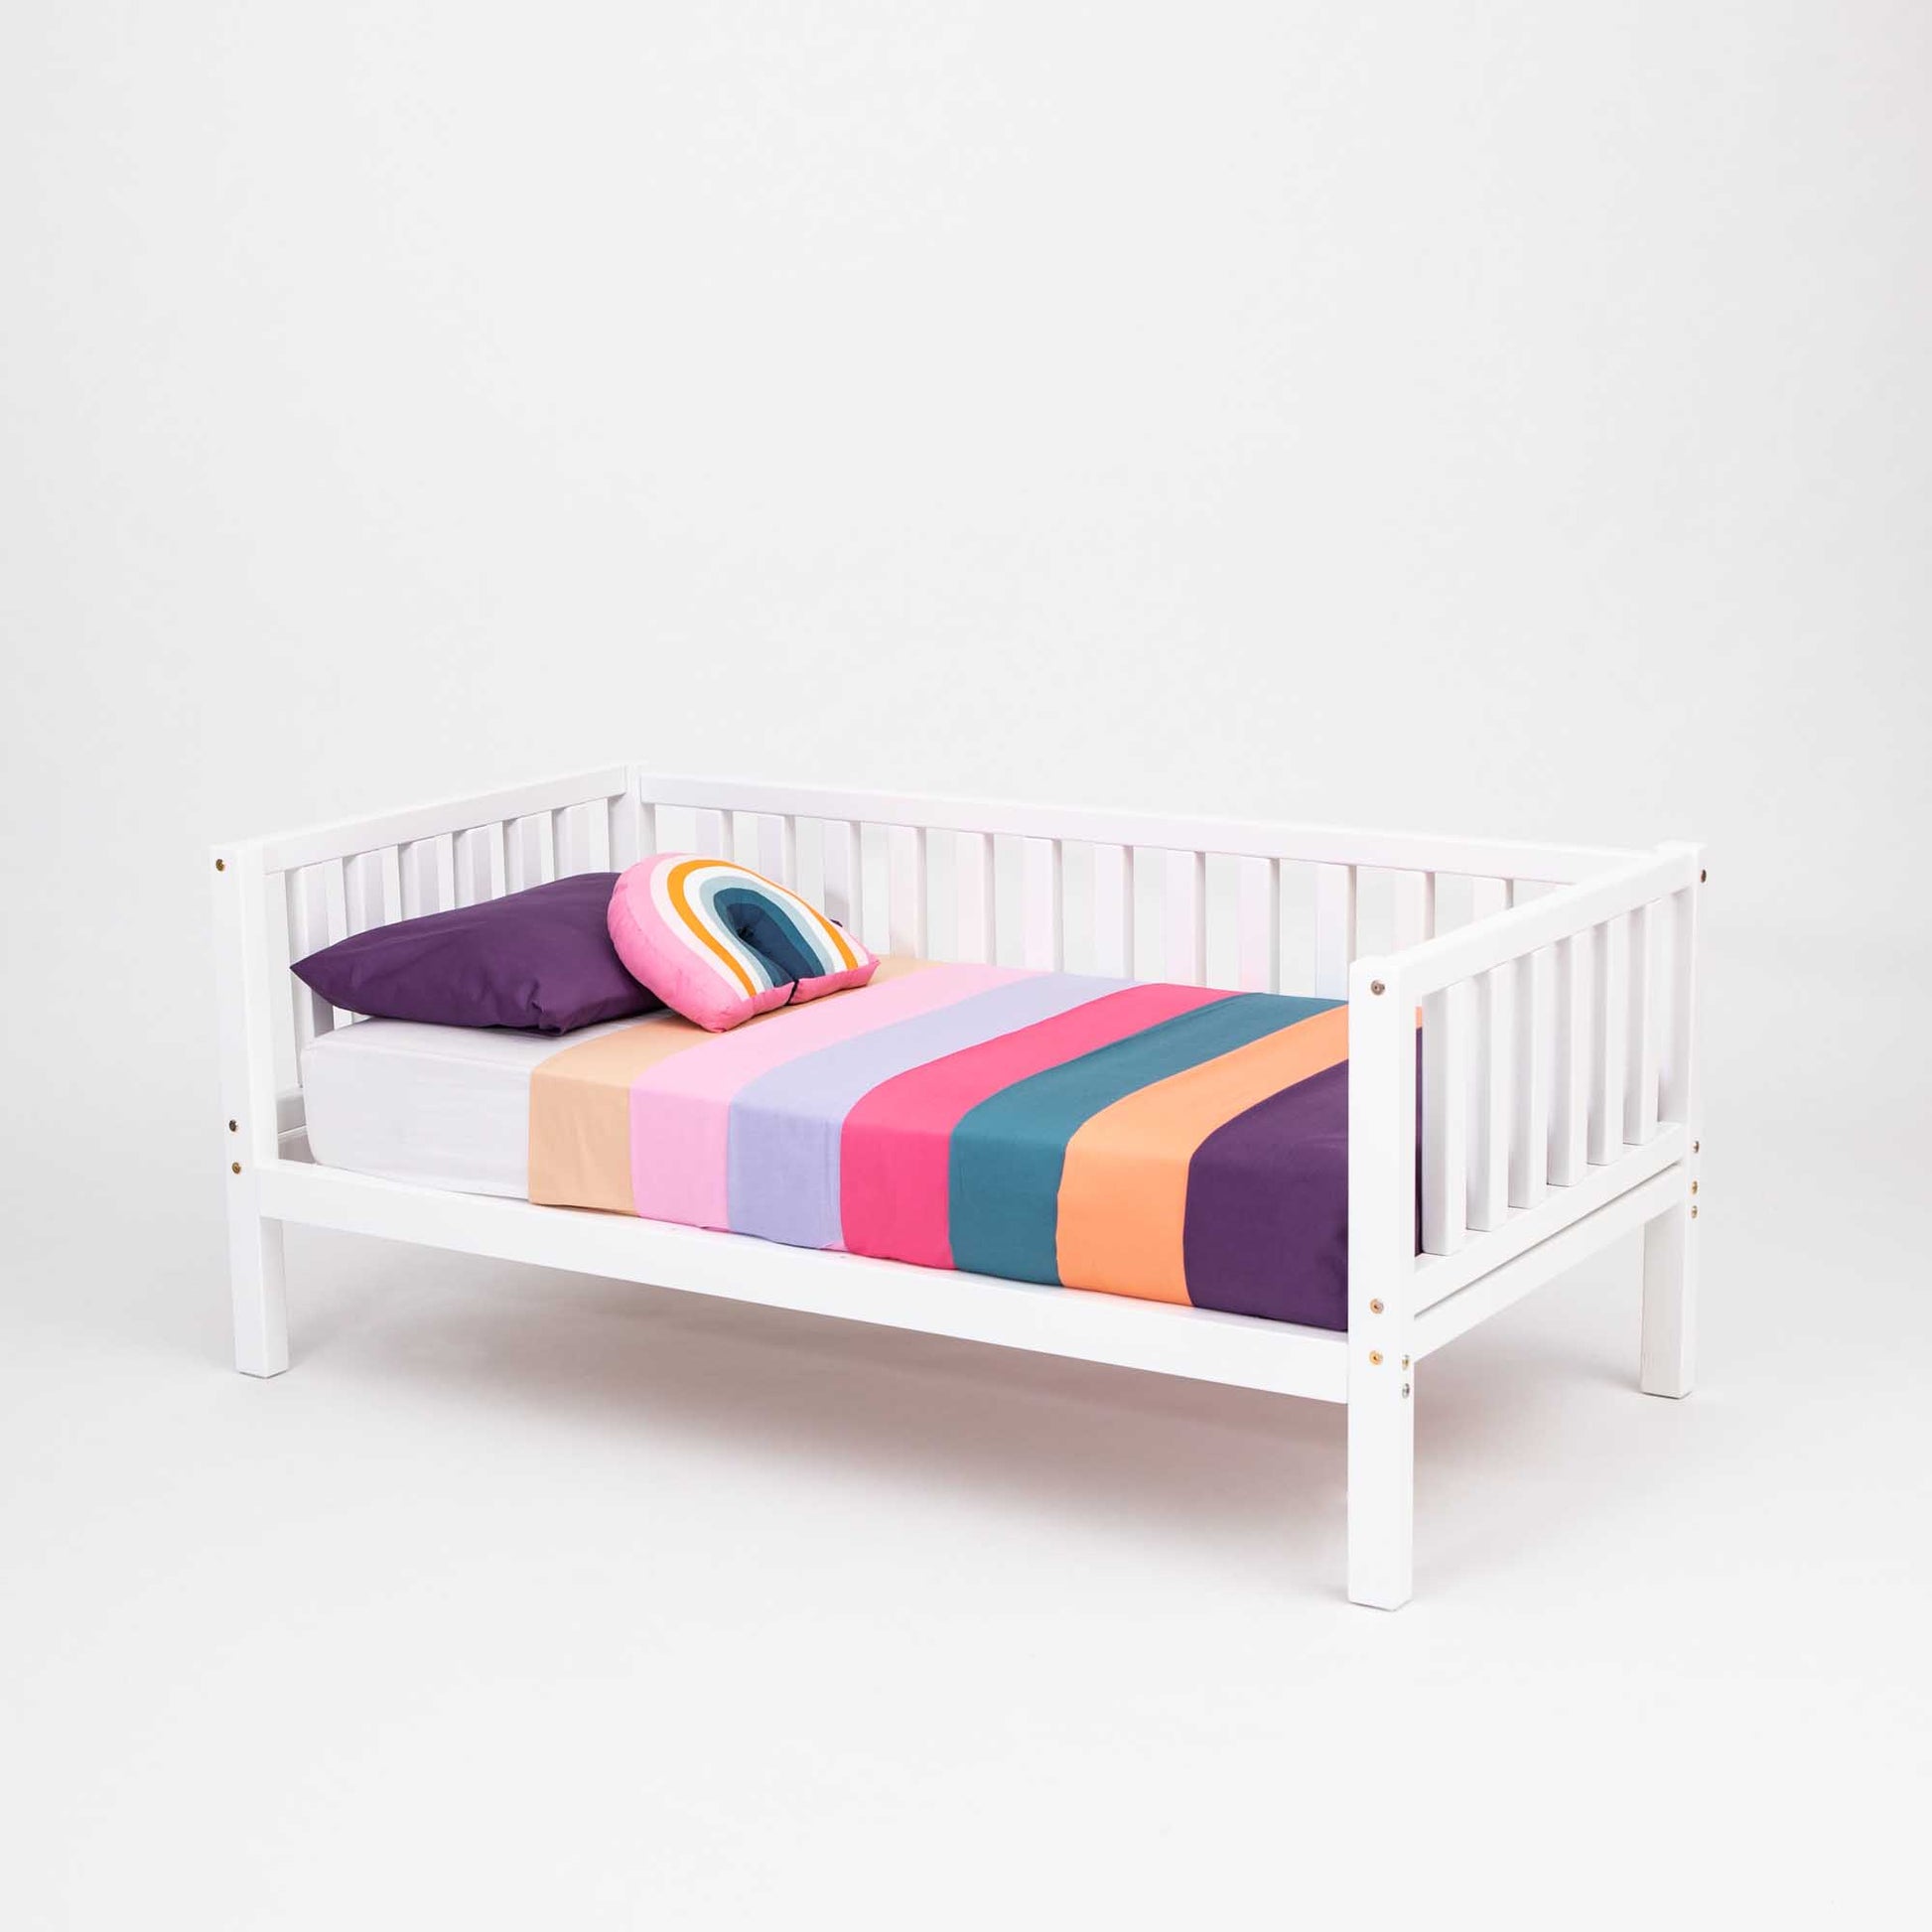 A vibrant and playful 2-in-1 children's bed adorned with a colorful striped blanket. (Product Name: 2-in-1 toddler bed on legs with a 3-sided vertical rail) from (Brand Name: Sweet Home From Wood).